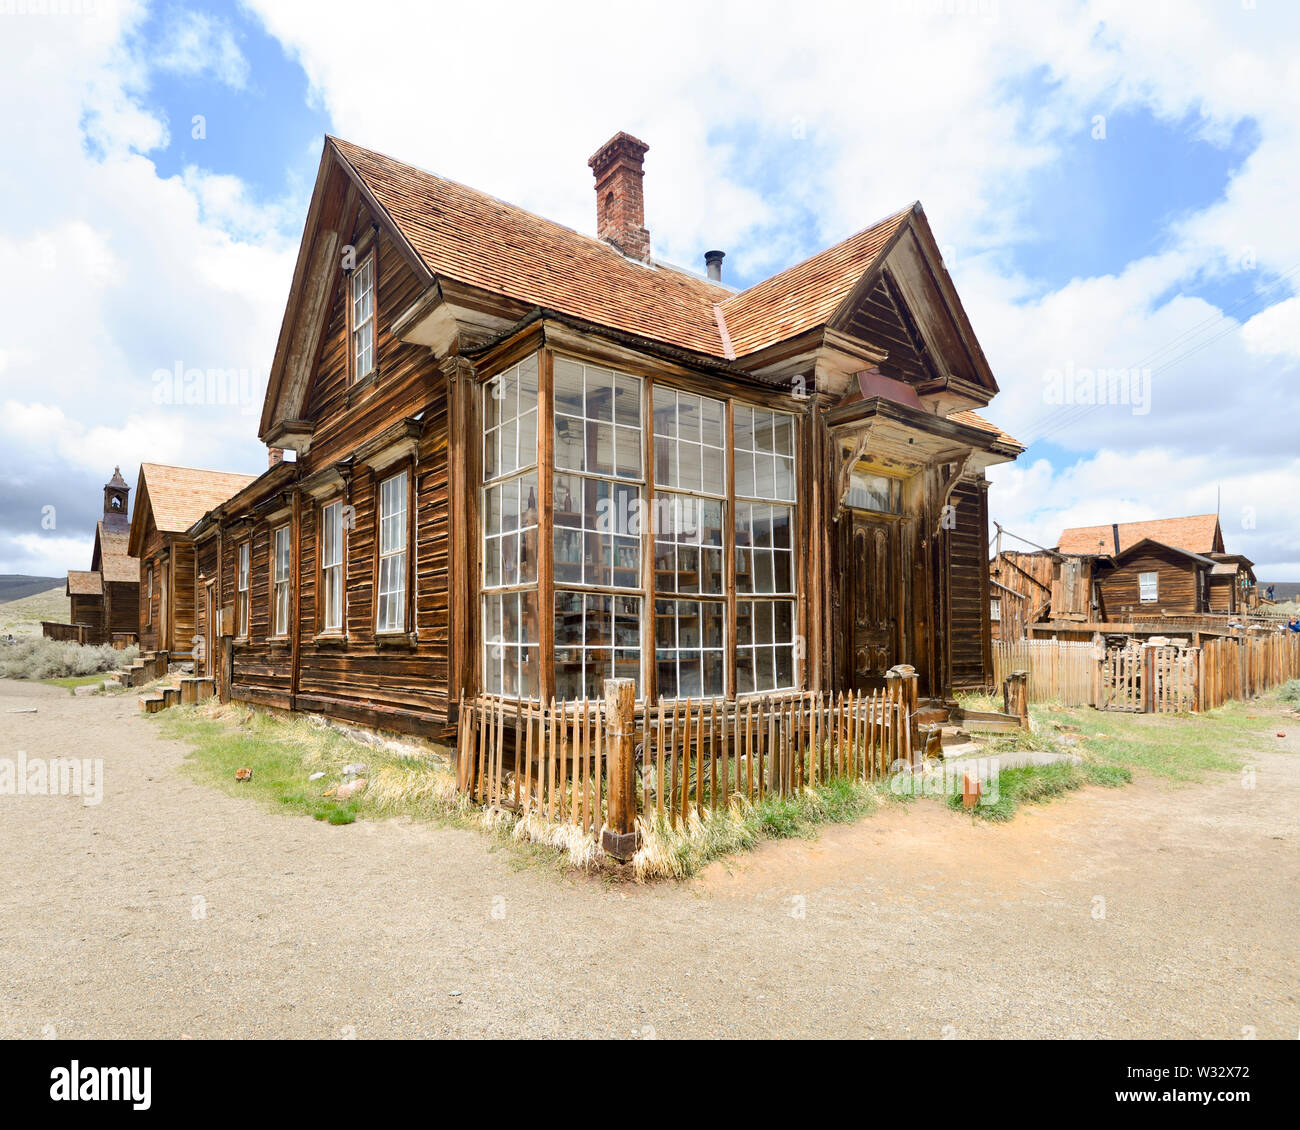 Bodie,Sierra Nevada, California, gold rush Ghost Town, House with antique bottles visible through large windows, picket fence, blue sky, white clouds Stock Photo